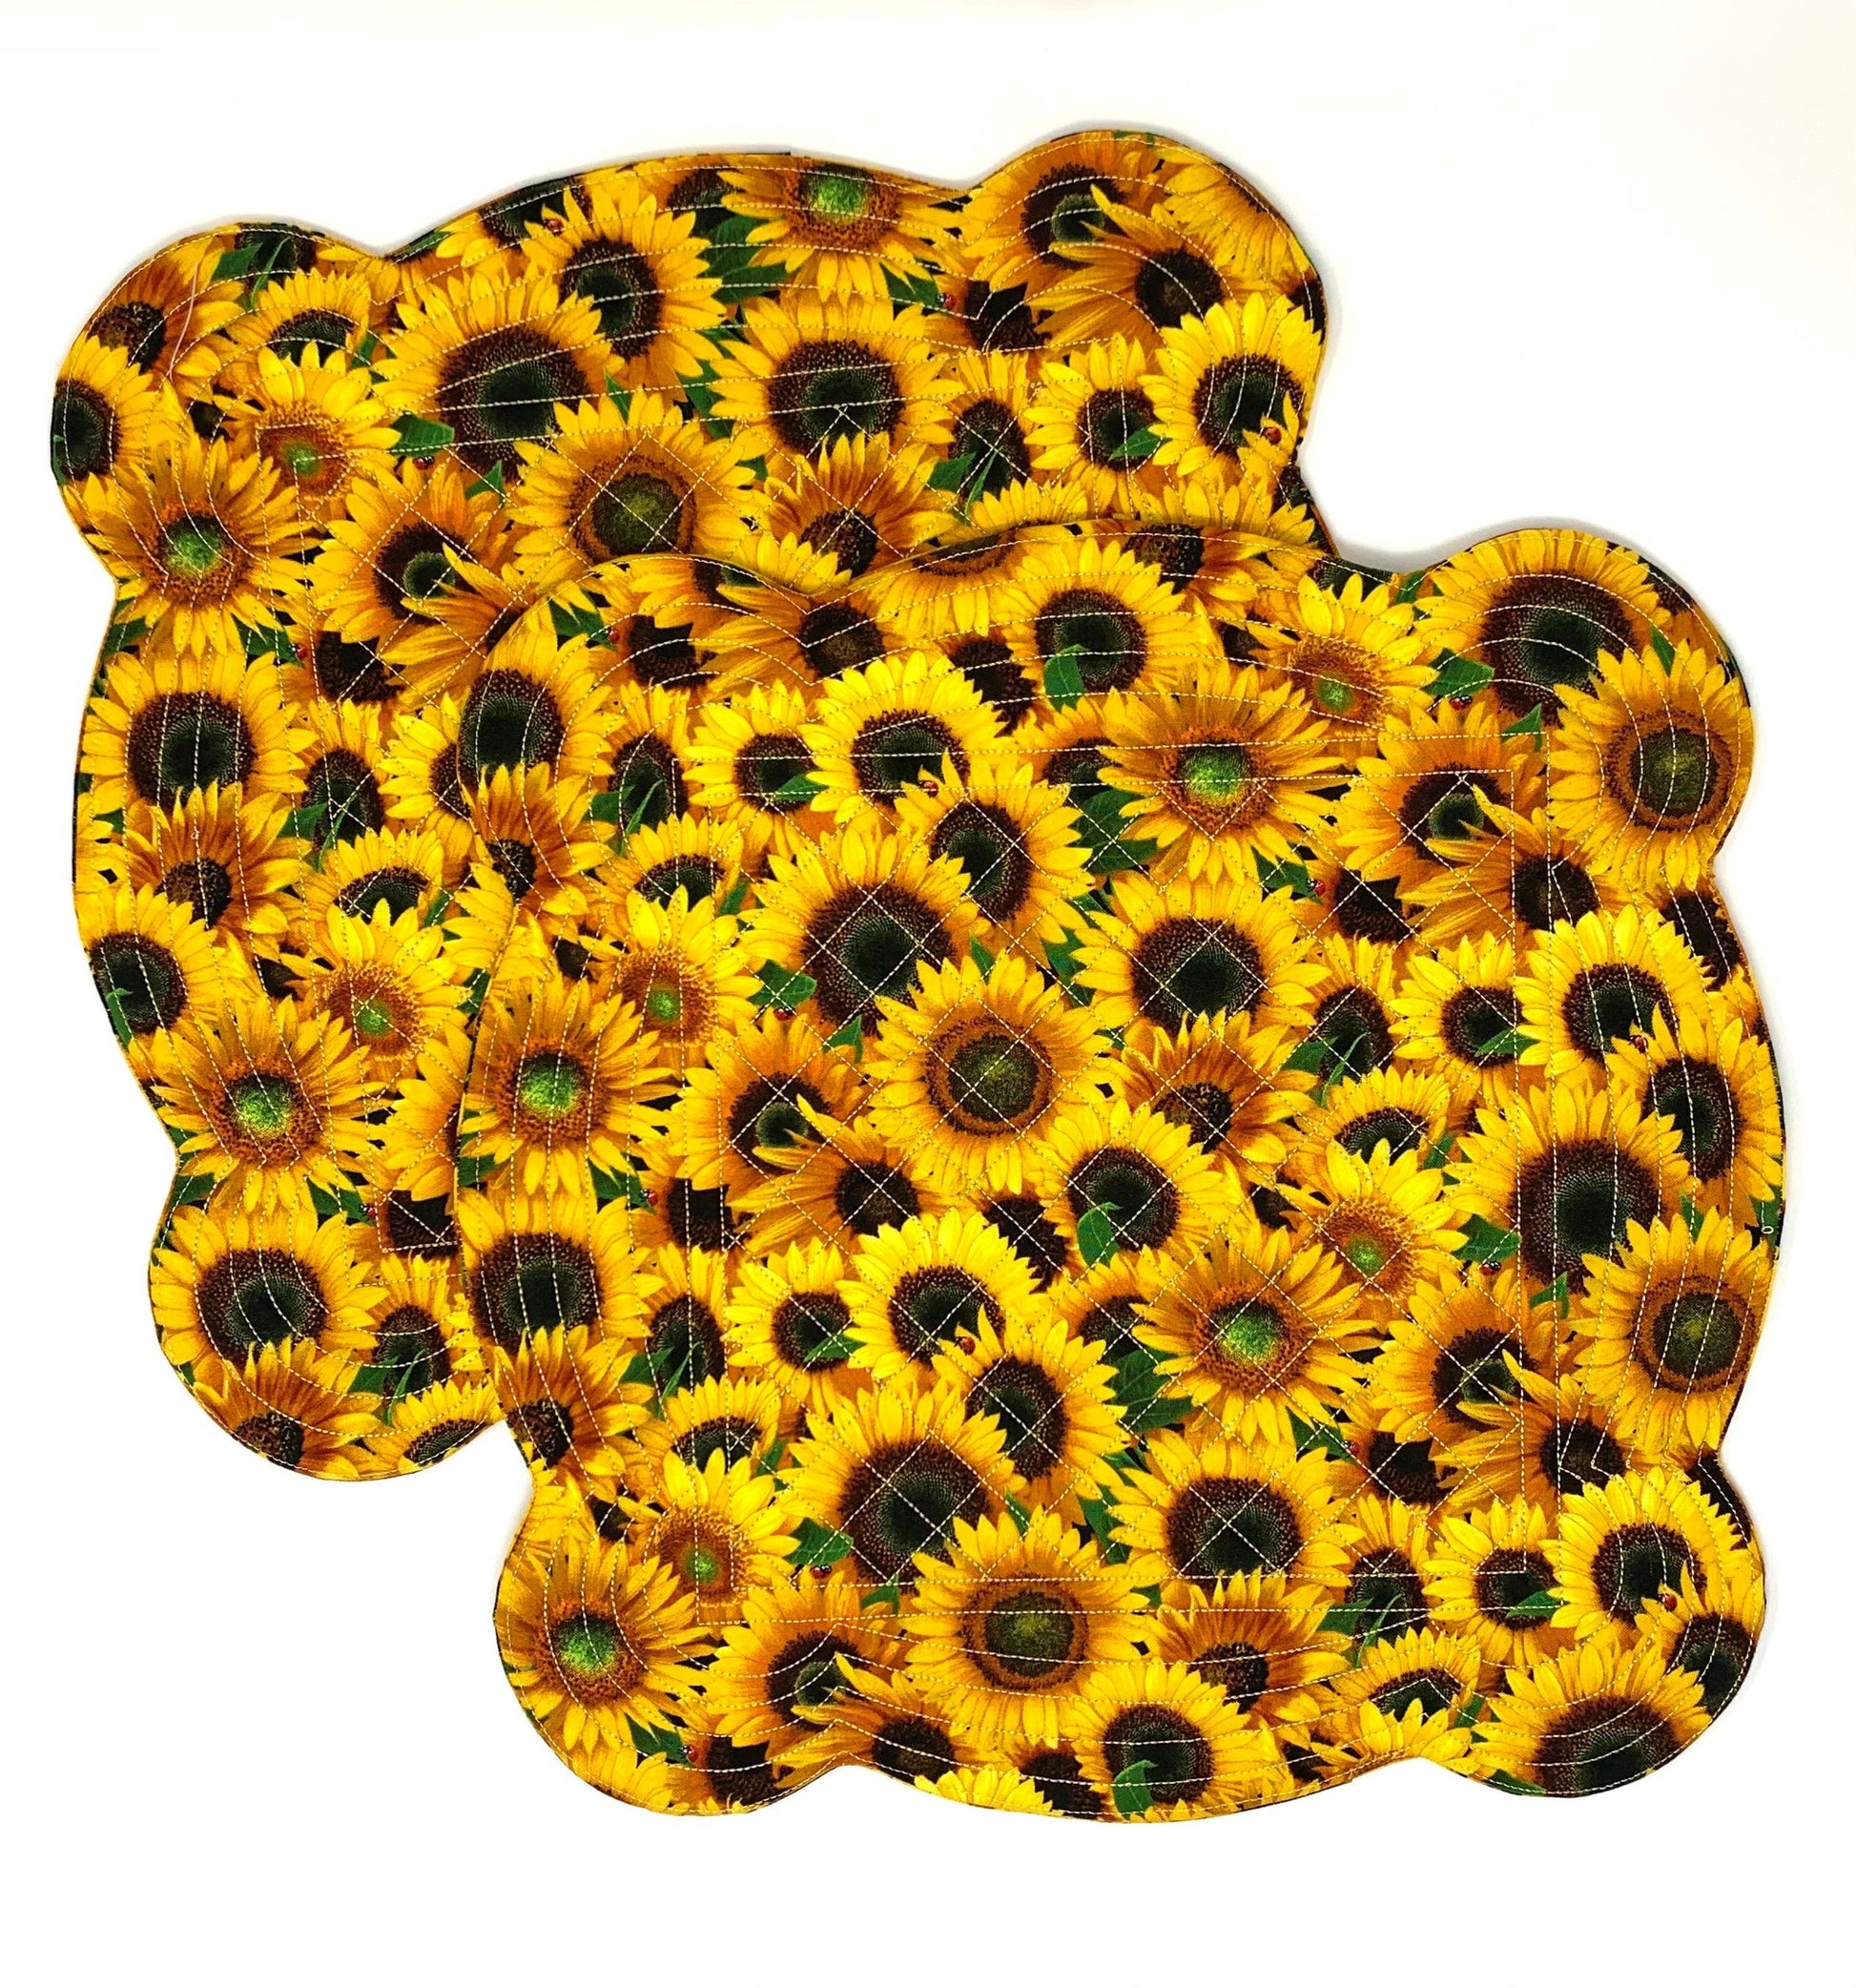 Sunflower Scalloped Place Mats, Set of 2, Floral, Scalloped Edge, Mini Quilts, Handmade